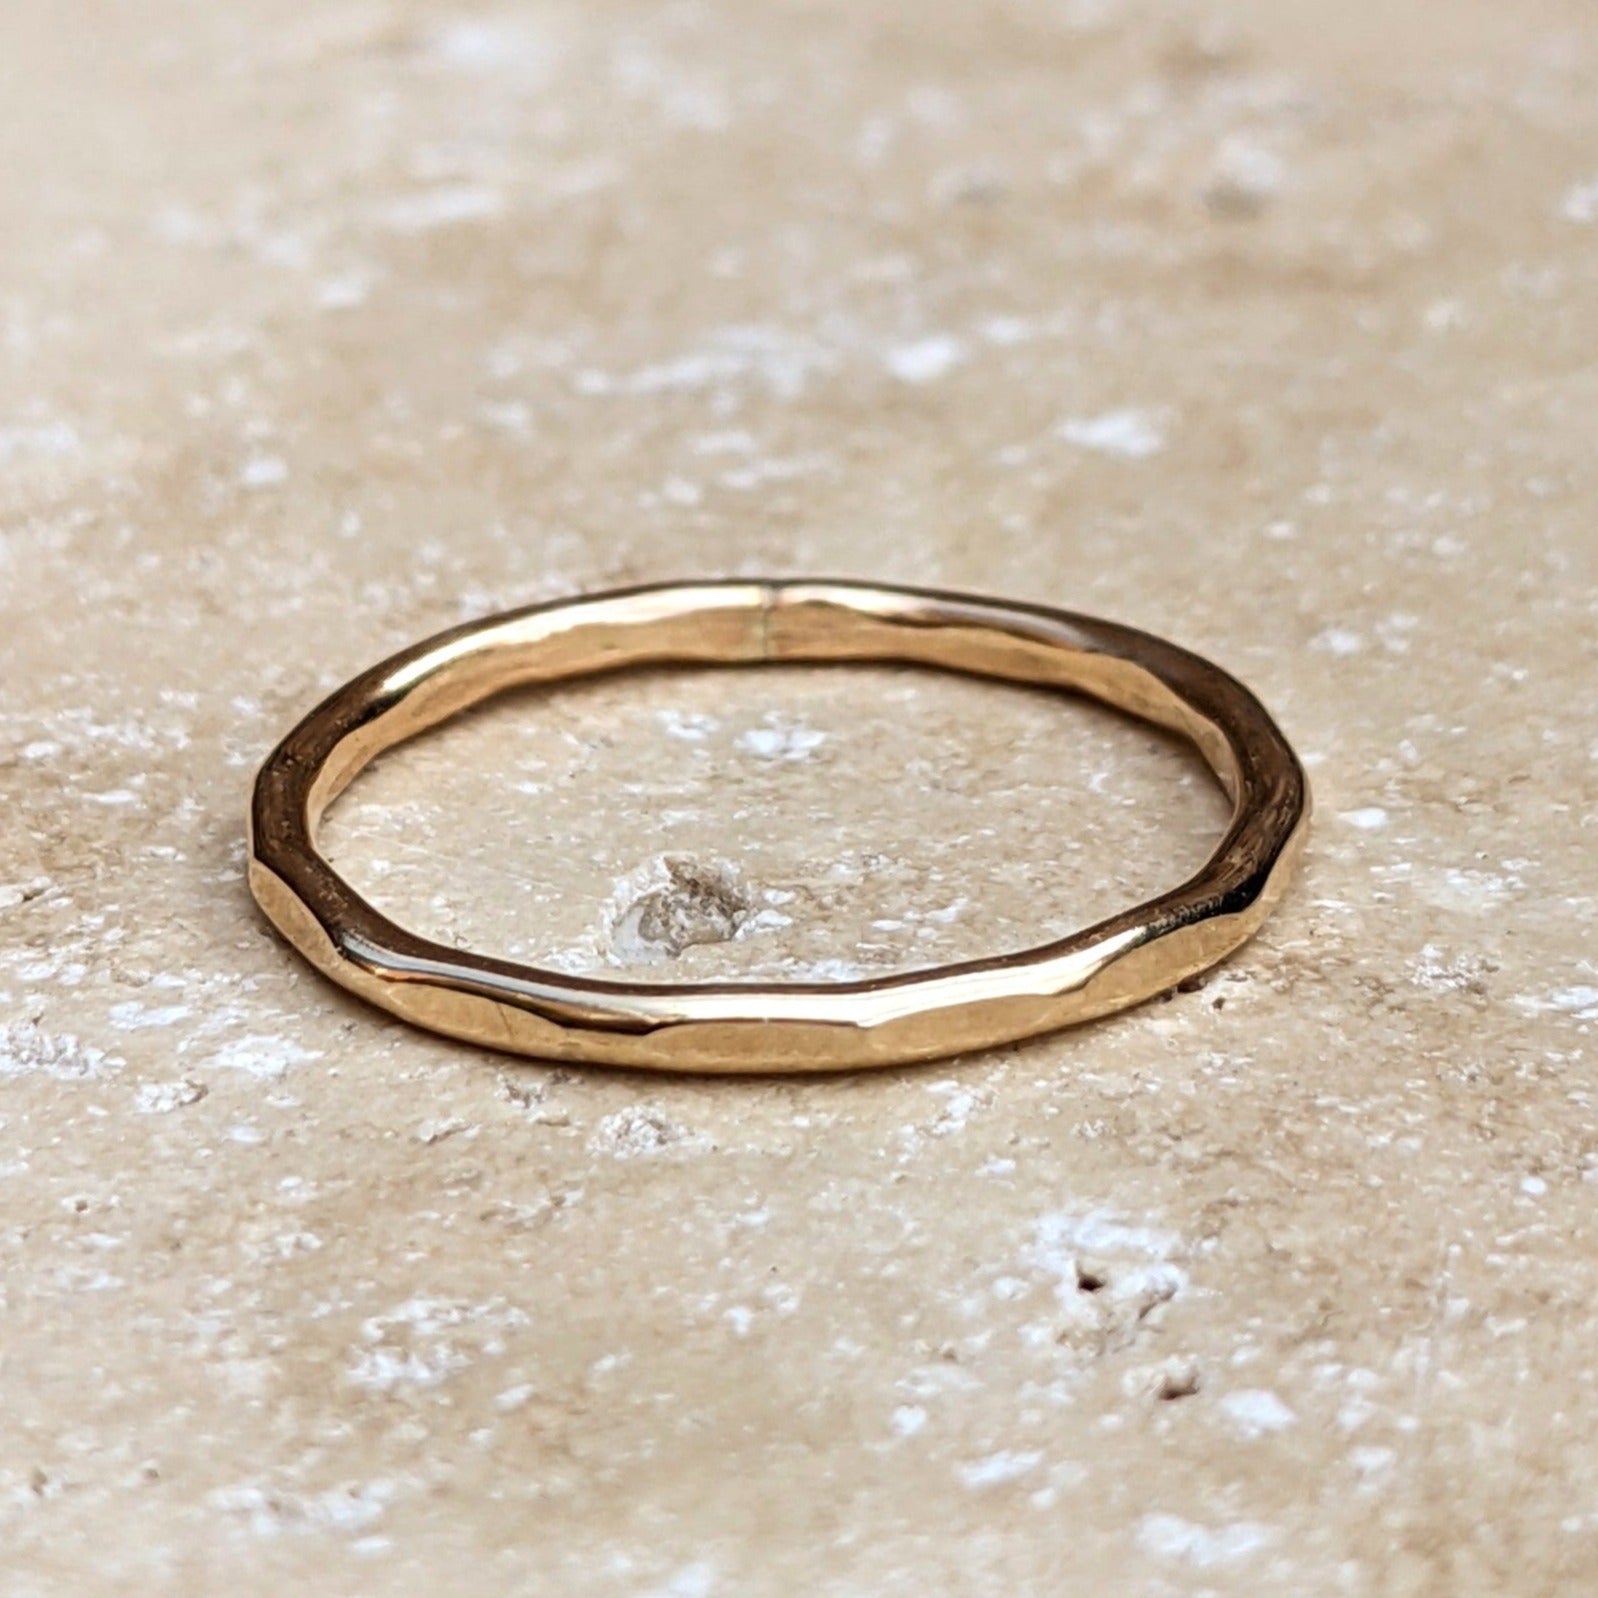 Hammered gold ring